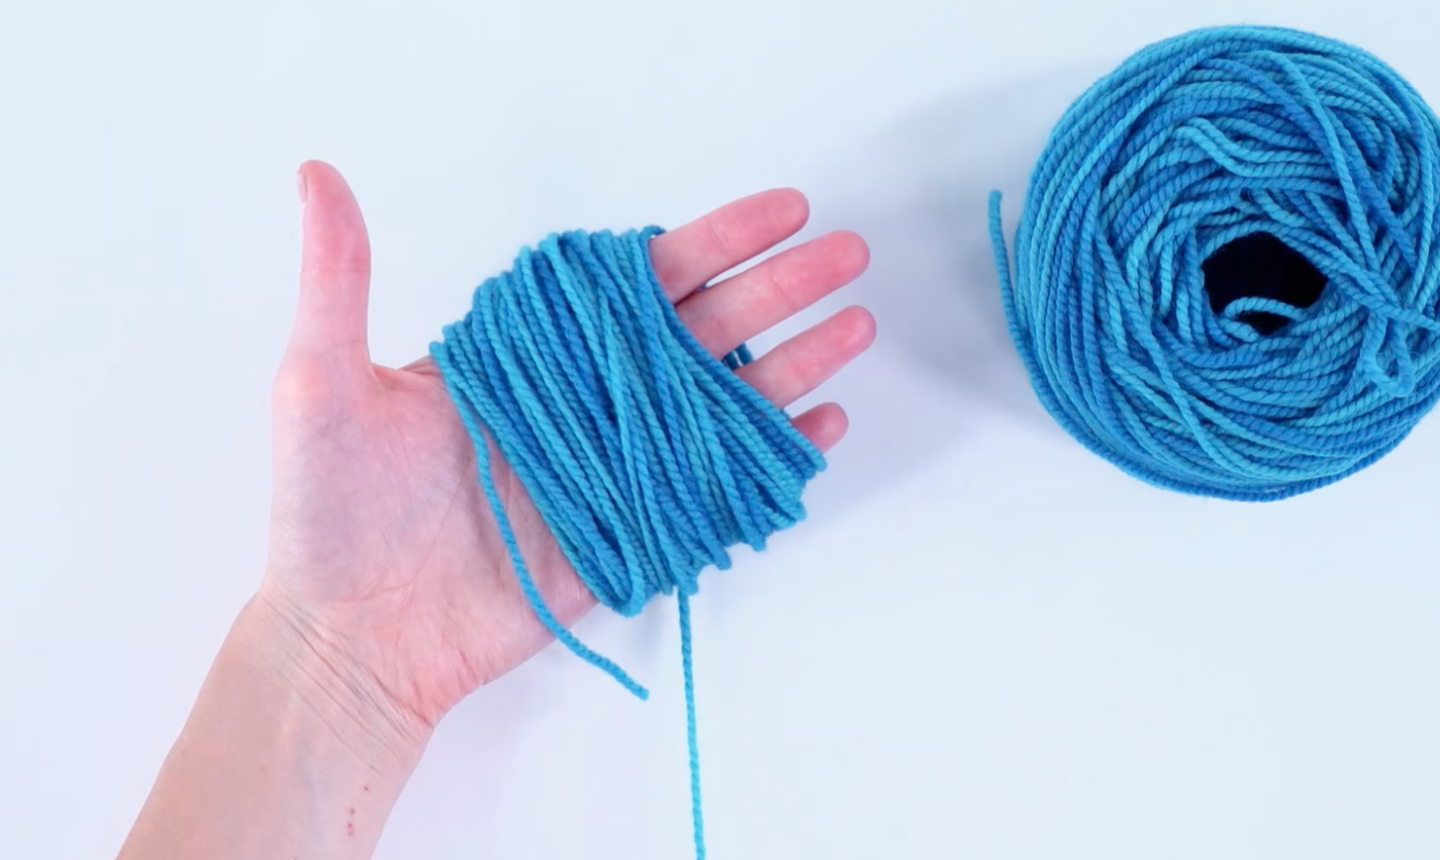 wrapping fingers in yarn